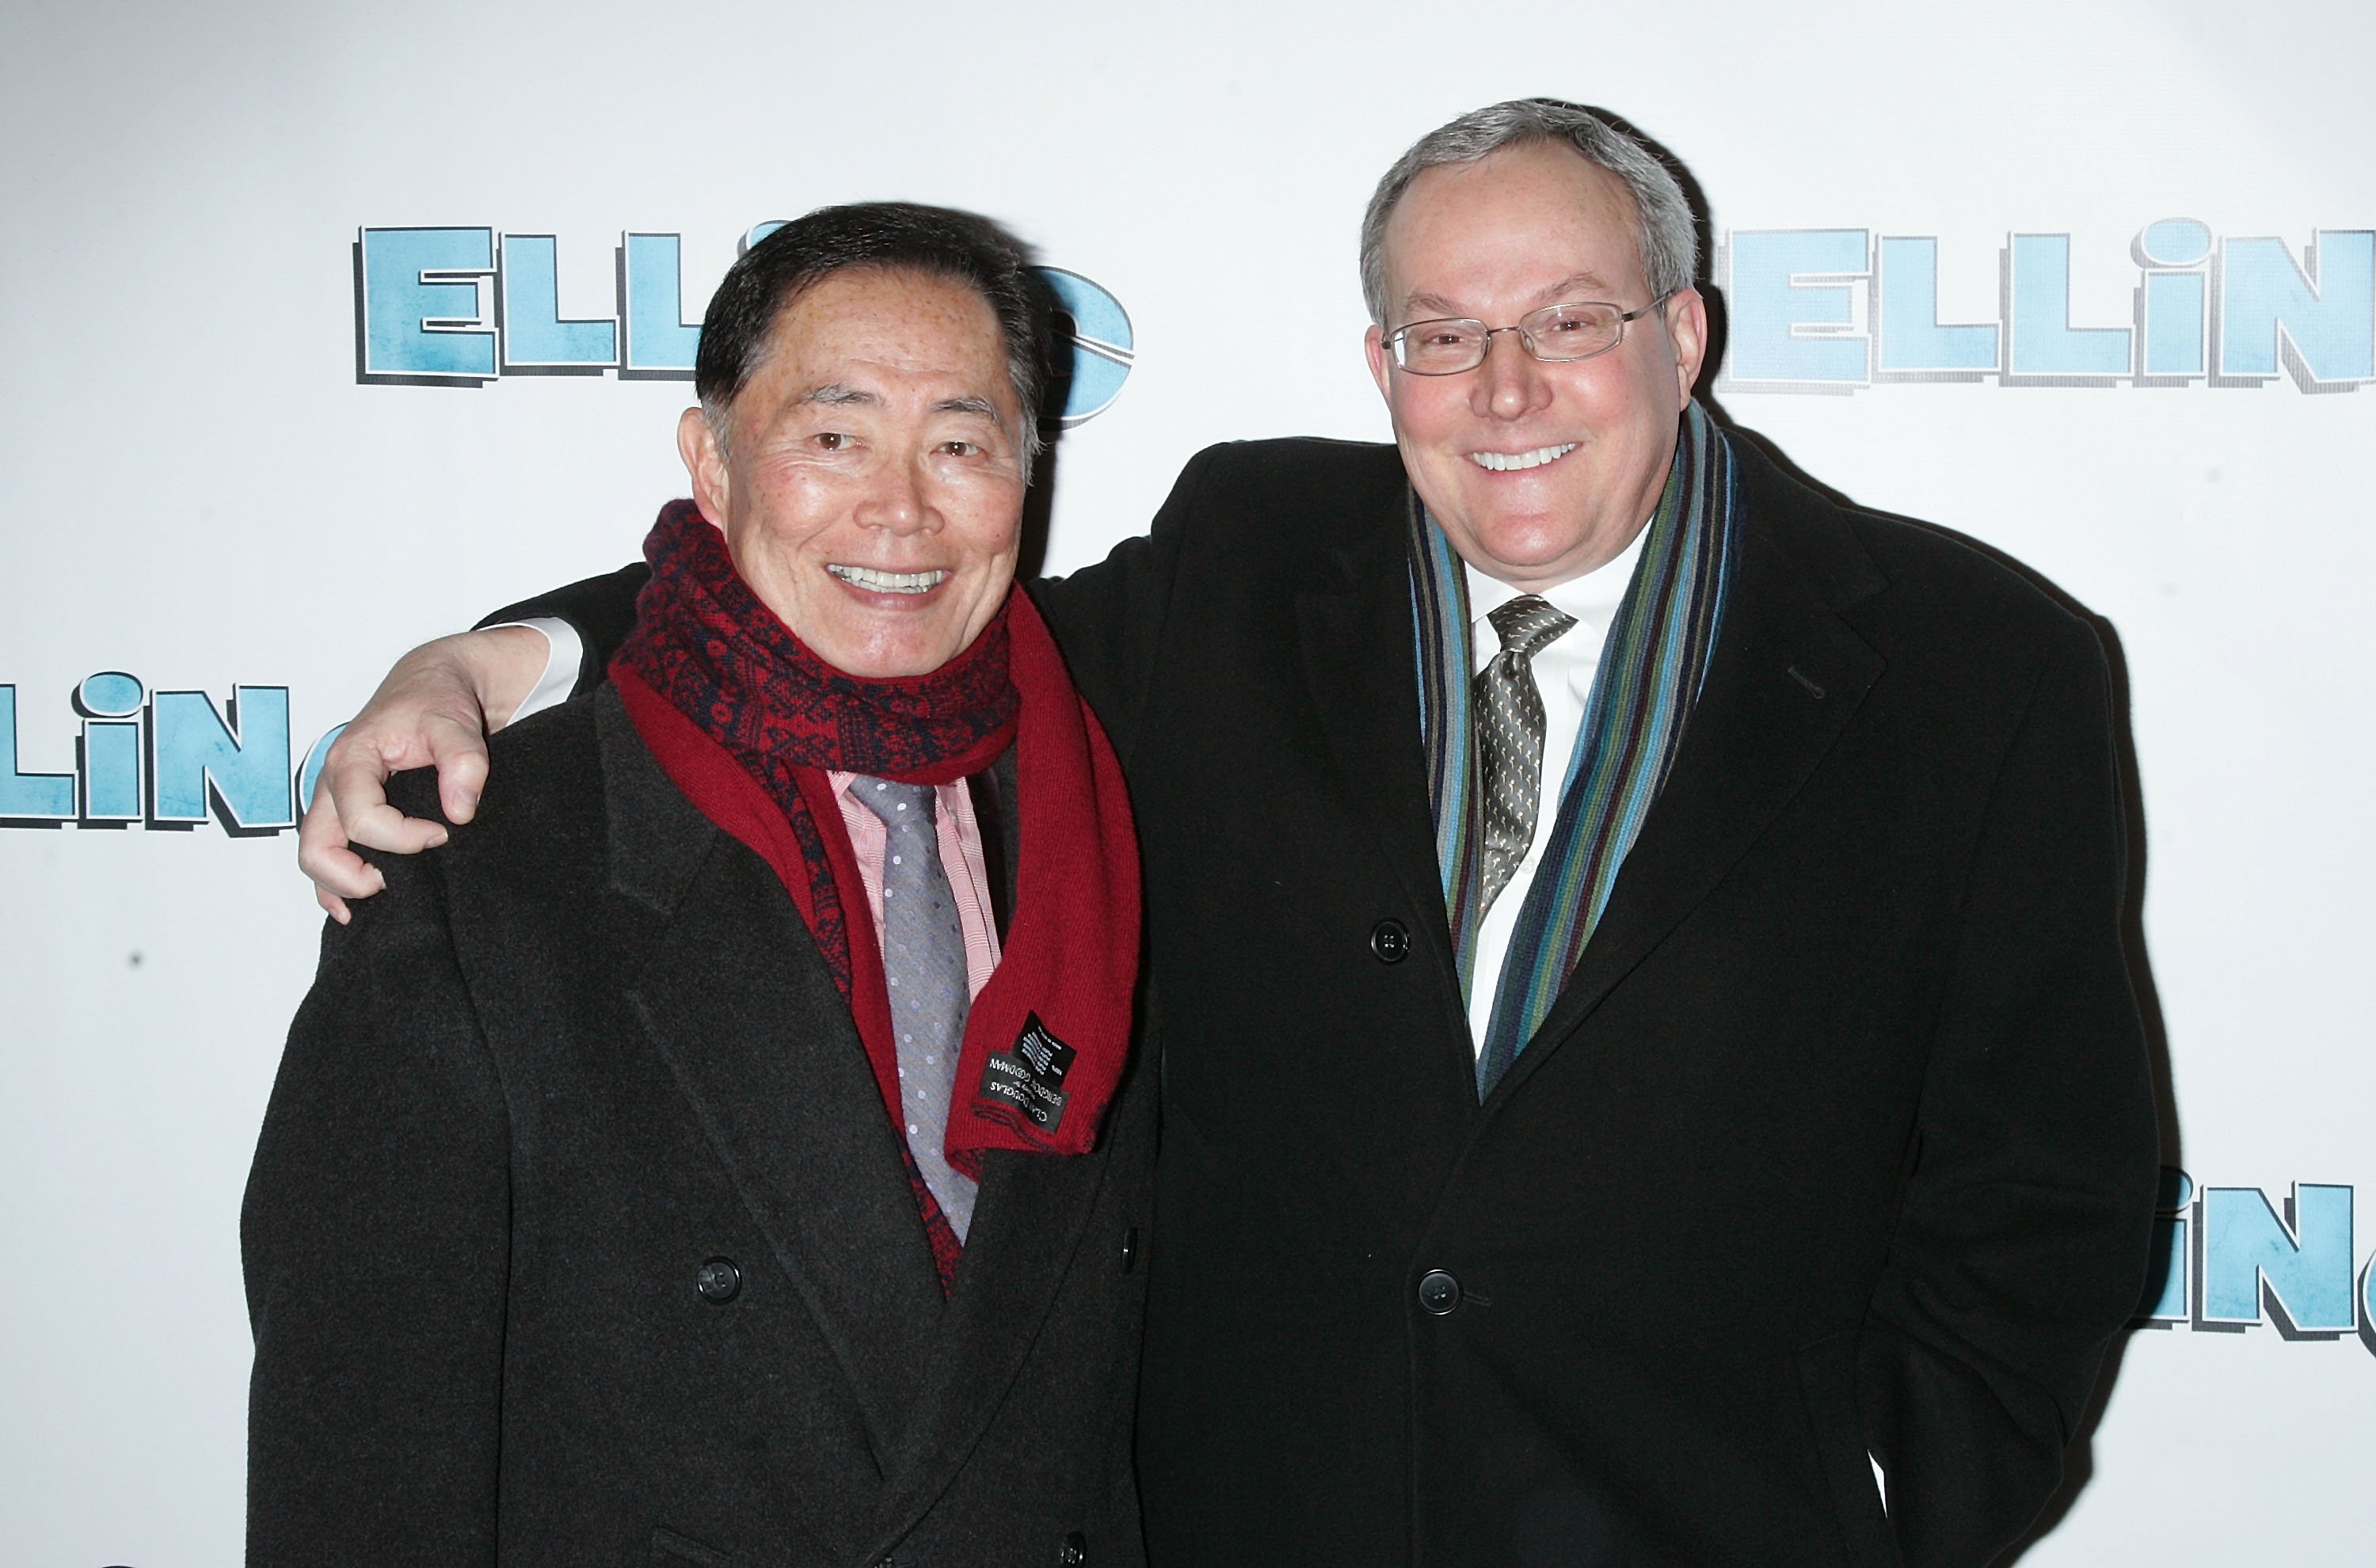 George Takei and Brad Altman at the Broadway opening night of "Elling" in New York on November 21, 2010 | Source: Getty Images